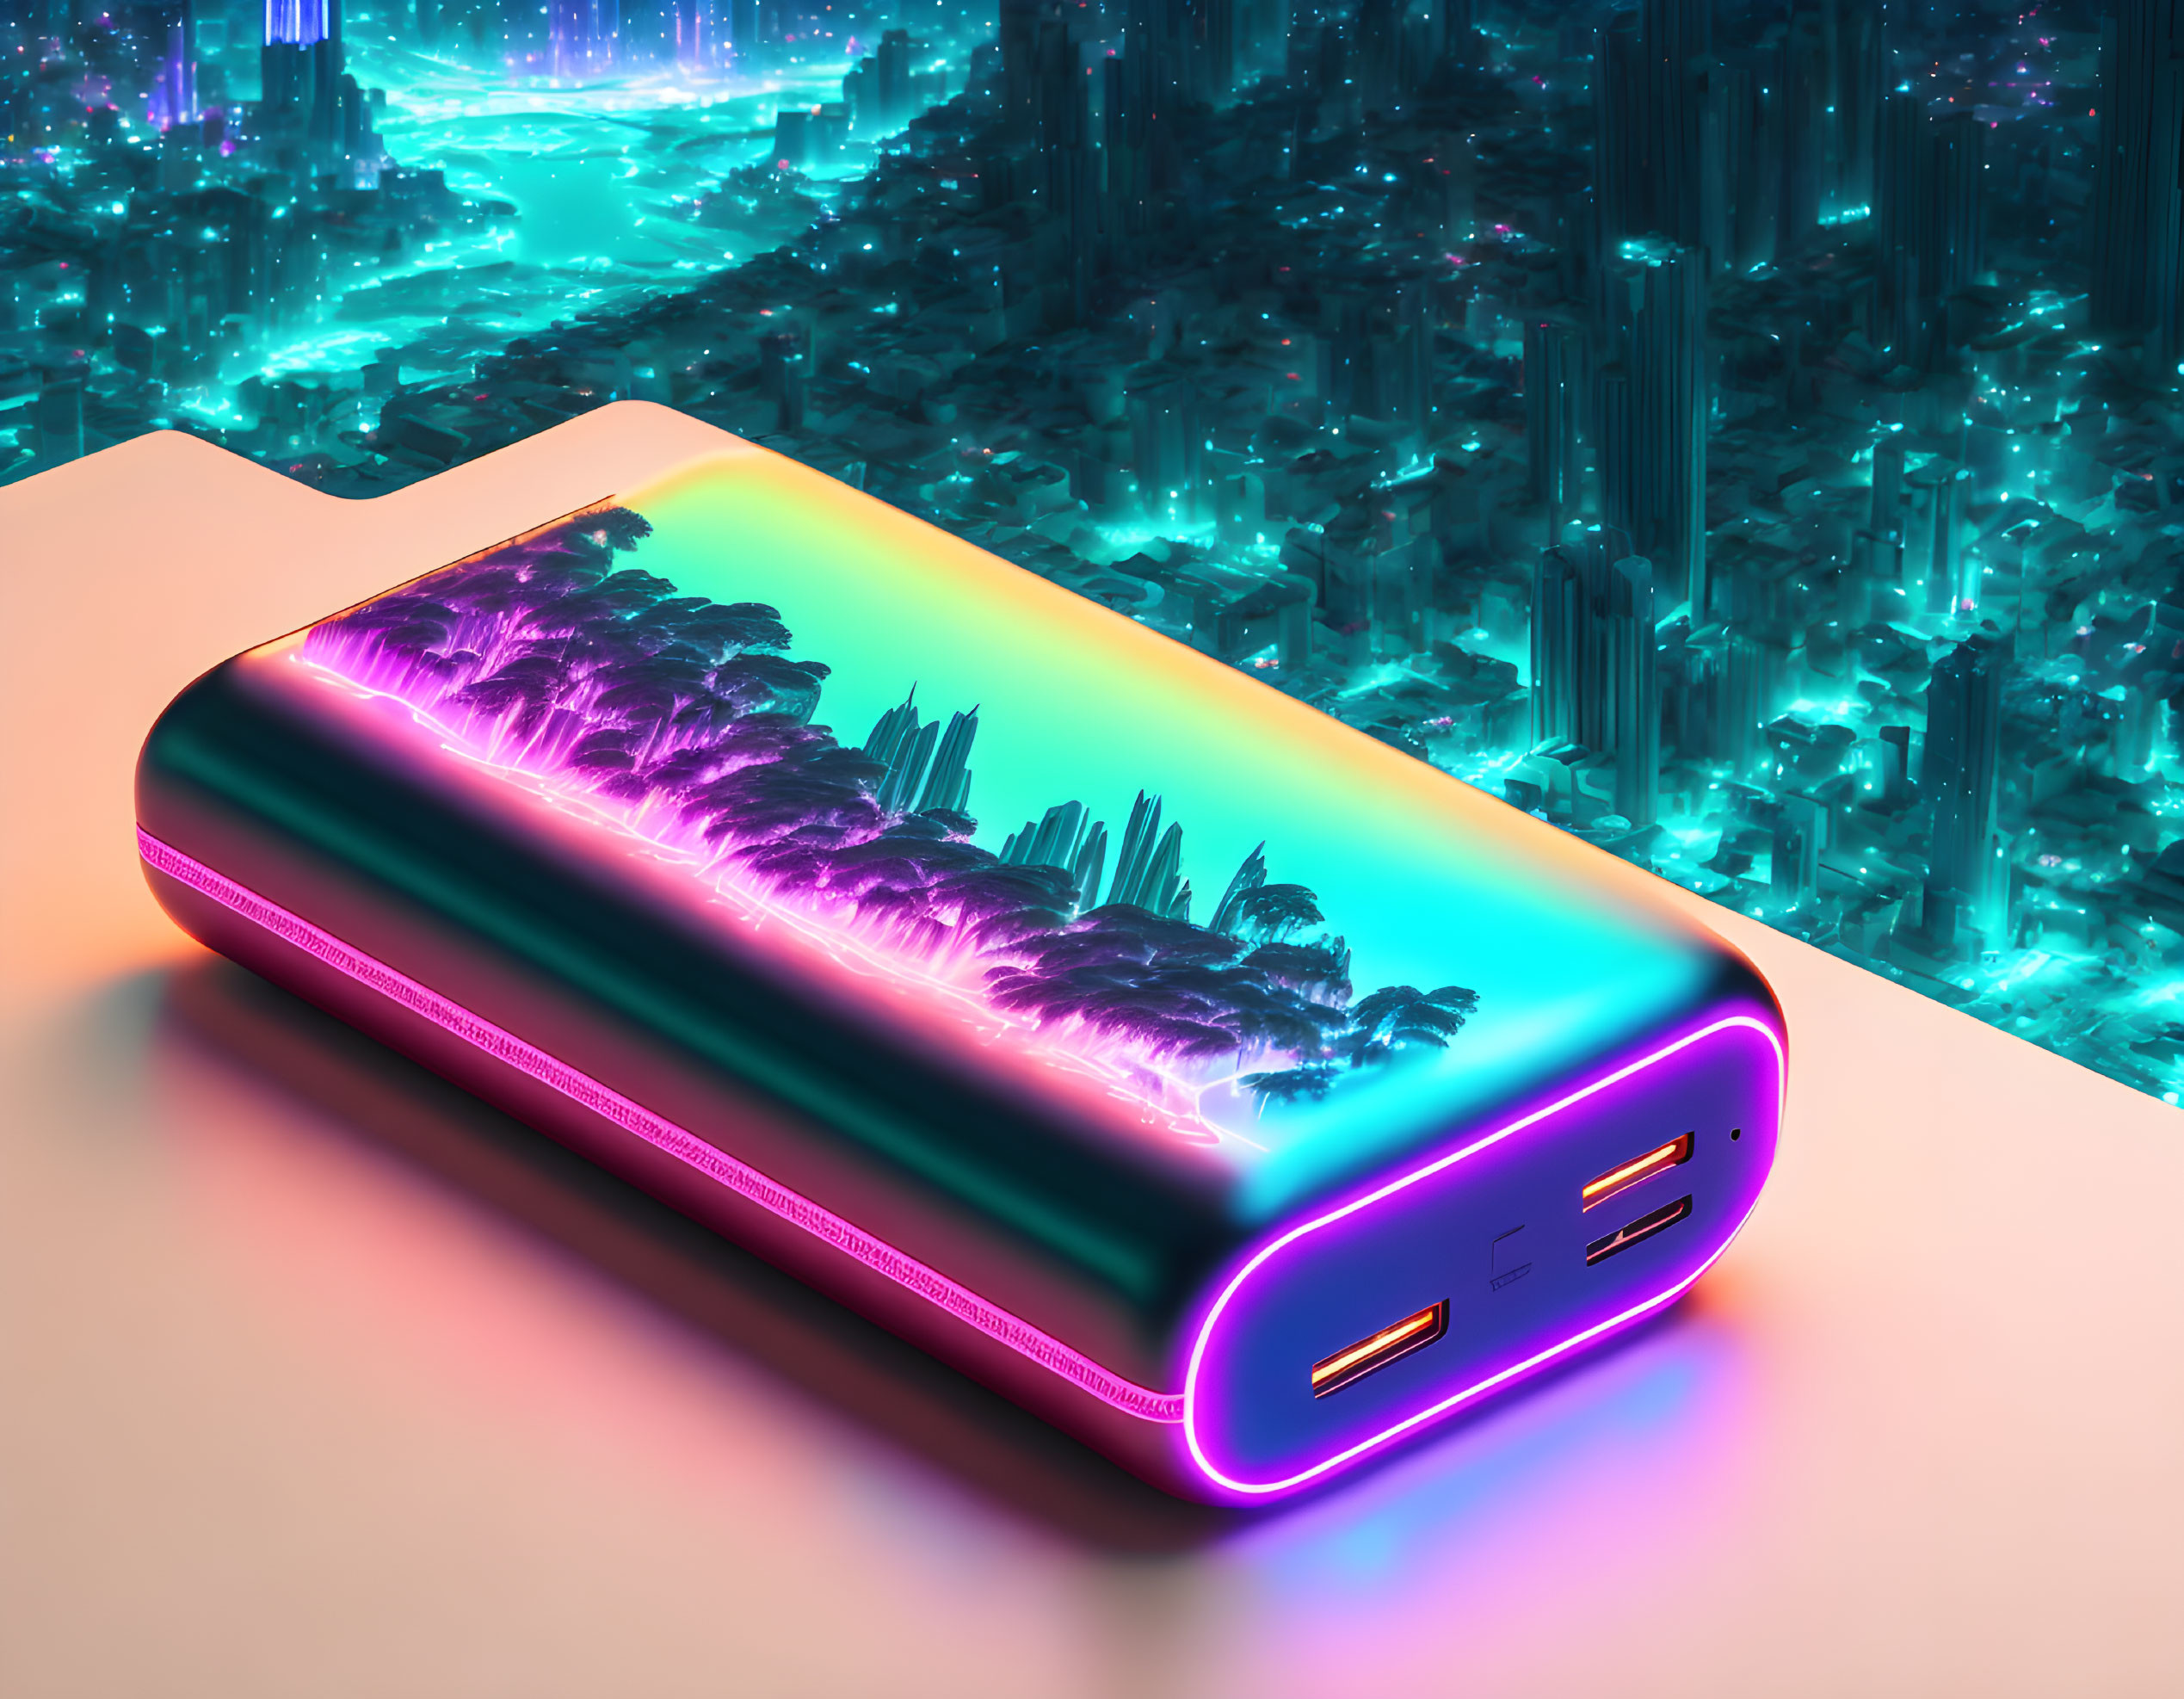 Neon-lit tropical palm tree power bank against cyber-style towers